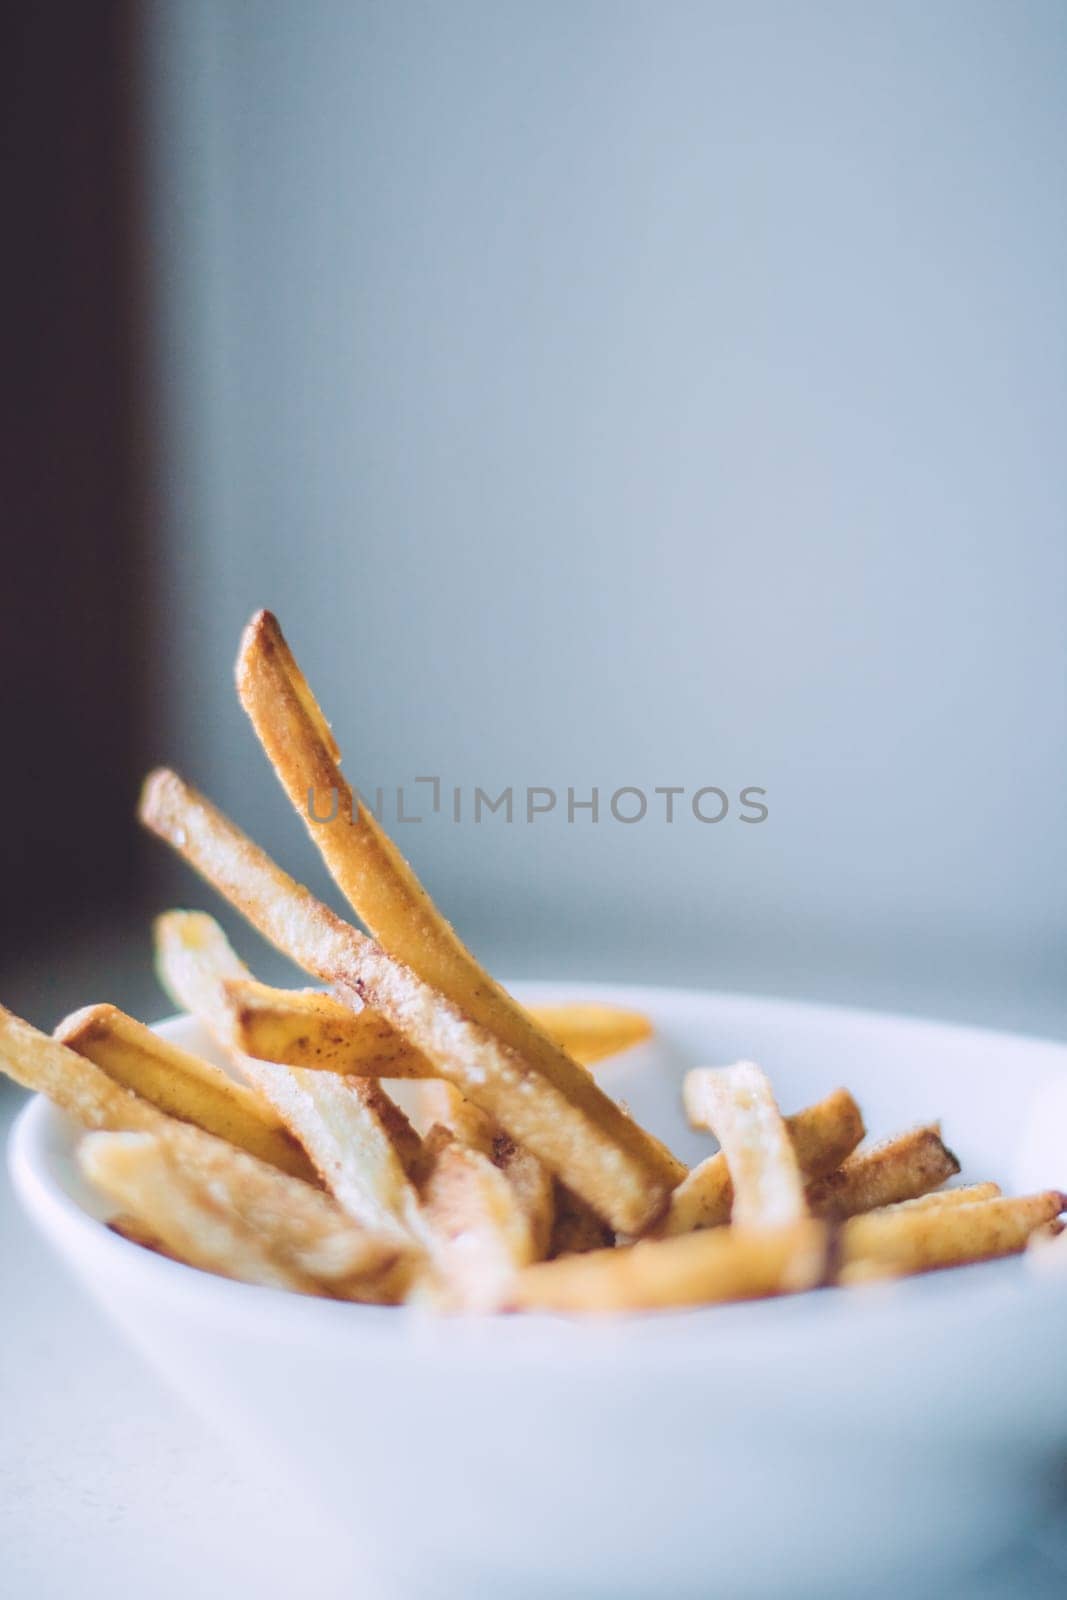 rustic food and homemade cooking styled concept - just cooked french fries served, elegant visuals